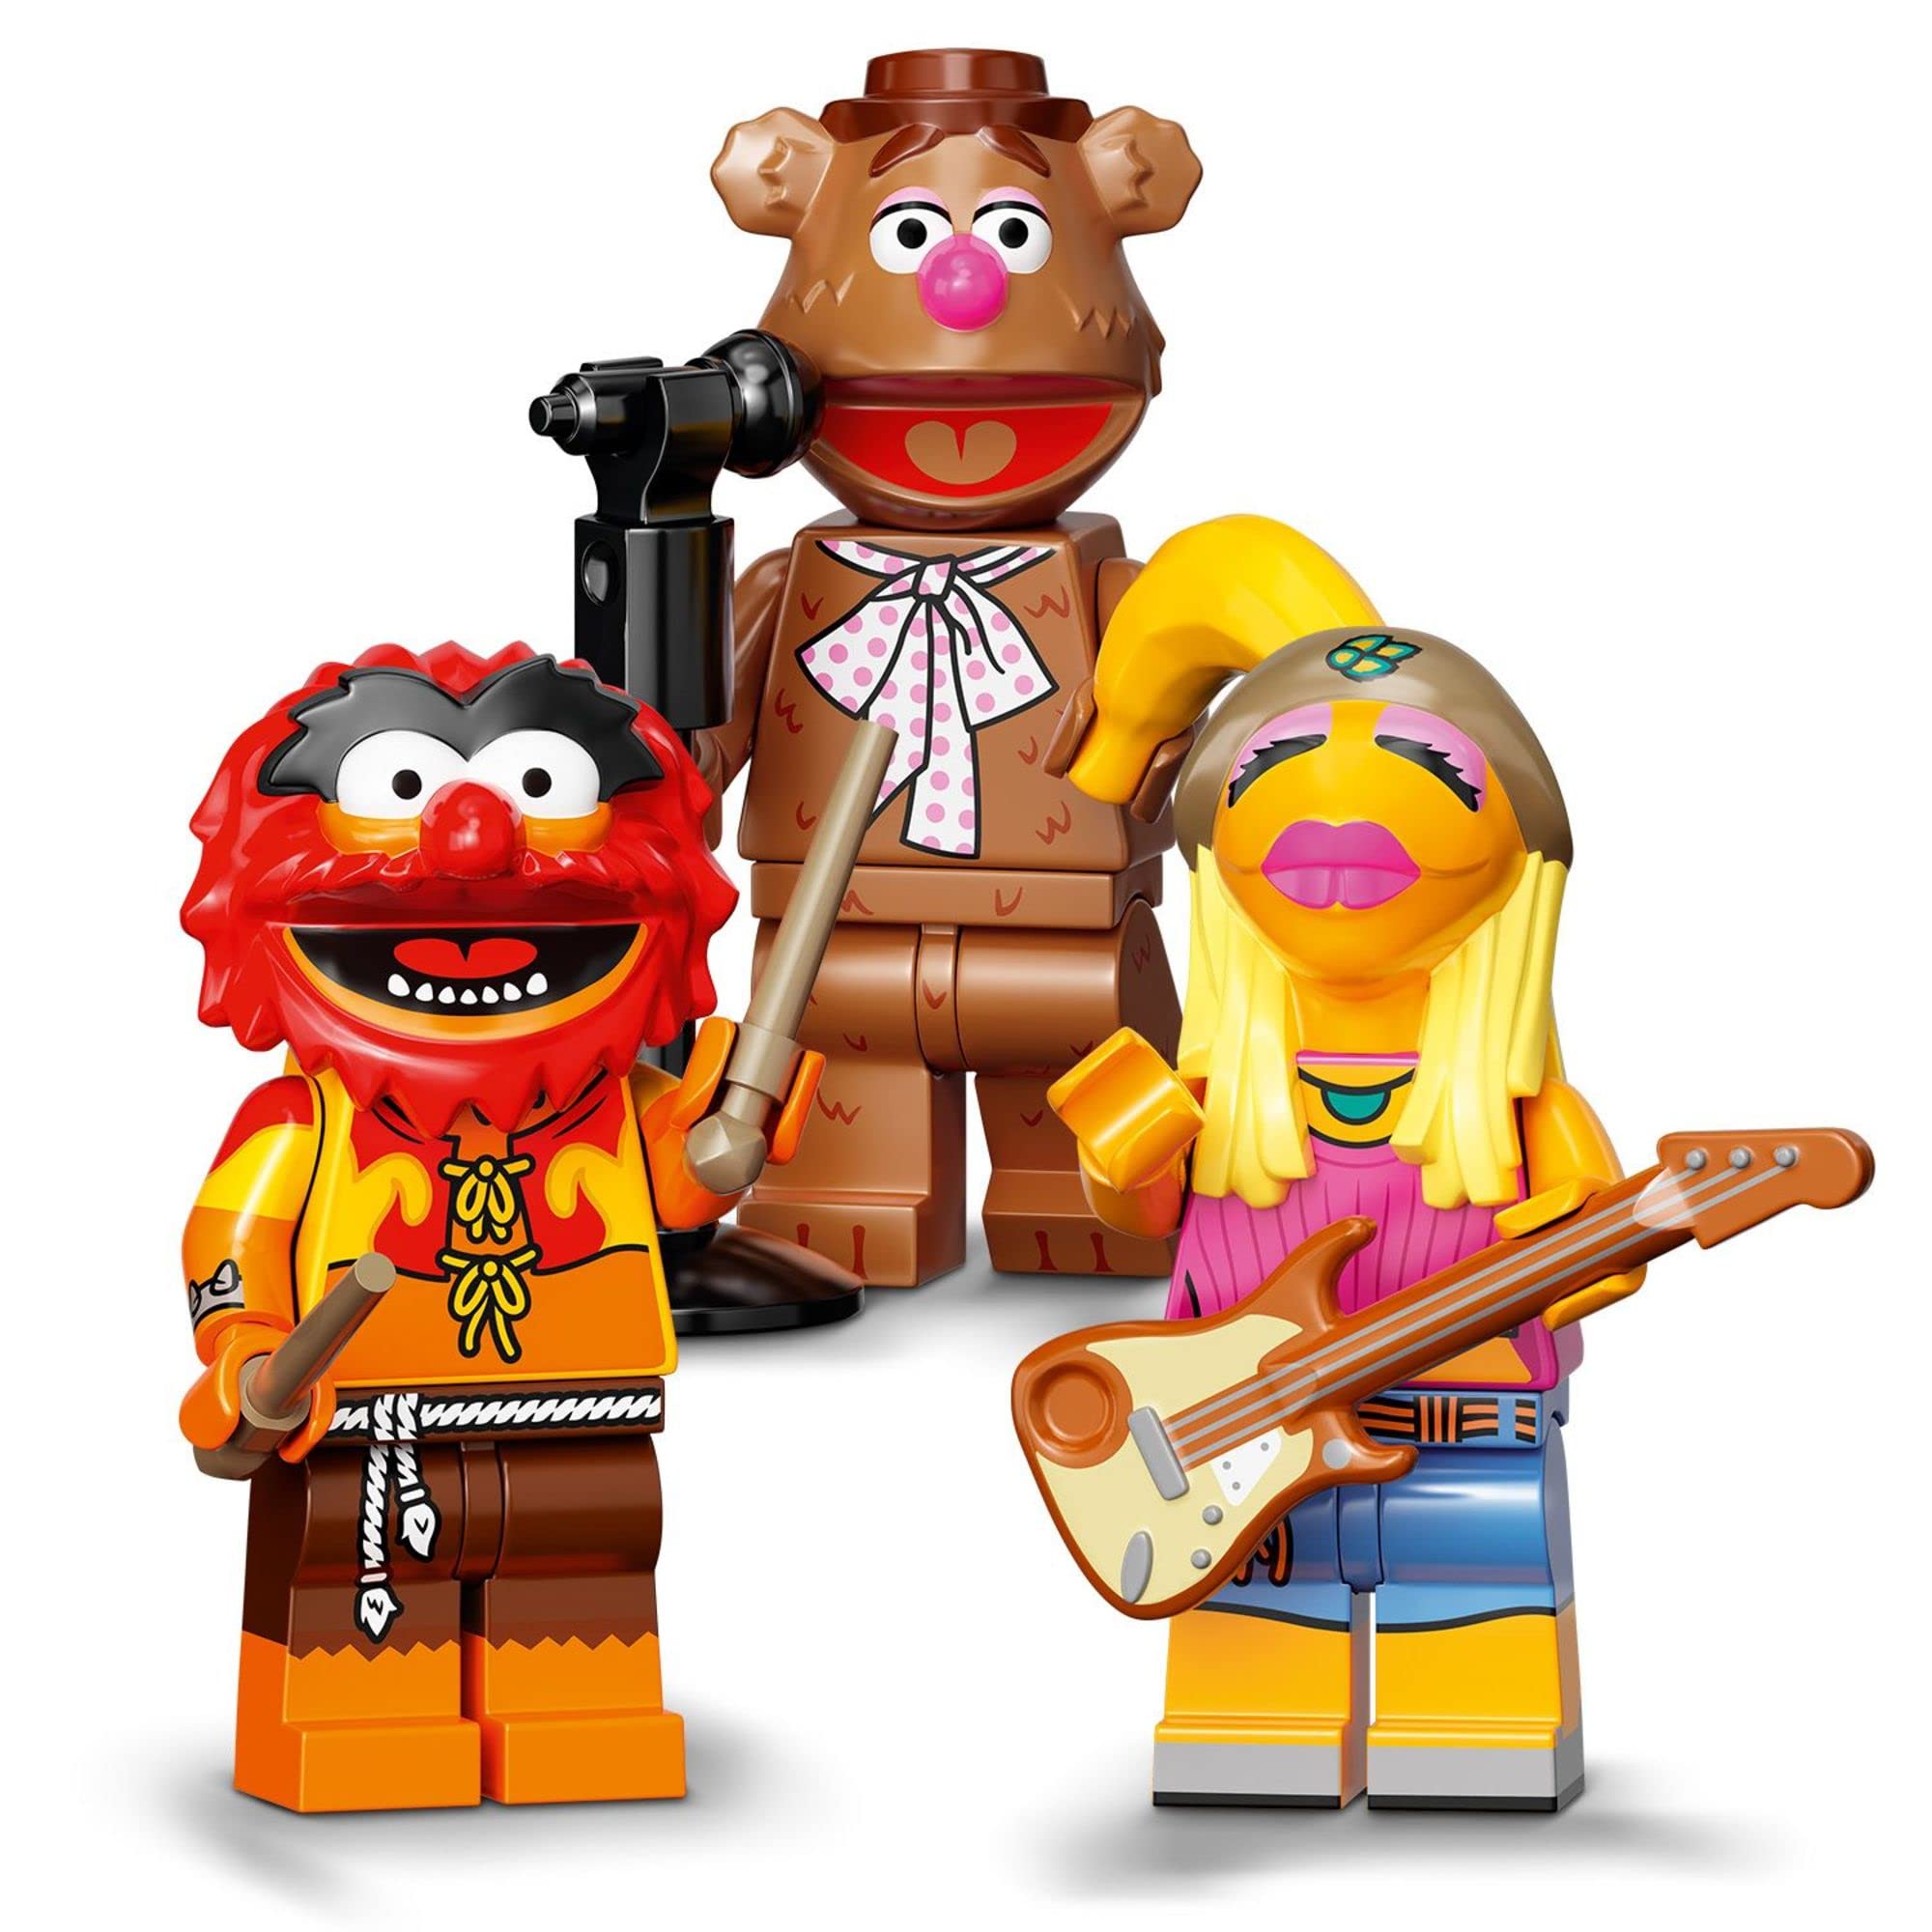 LEGO Minifigures The Muppets Limited Edition Collectible 71035 Toys for Role-Playing or a Figurine Collection; A Creative Addition to Any Set for Kids Ages 5 and up (Pack of 6)